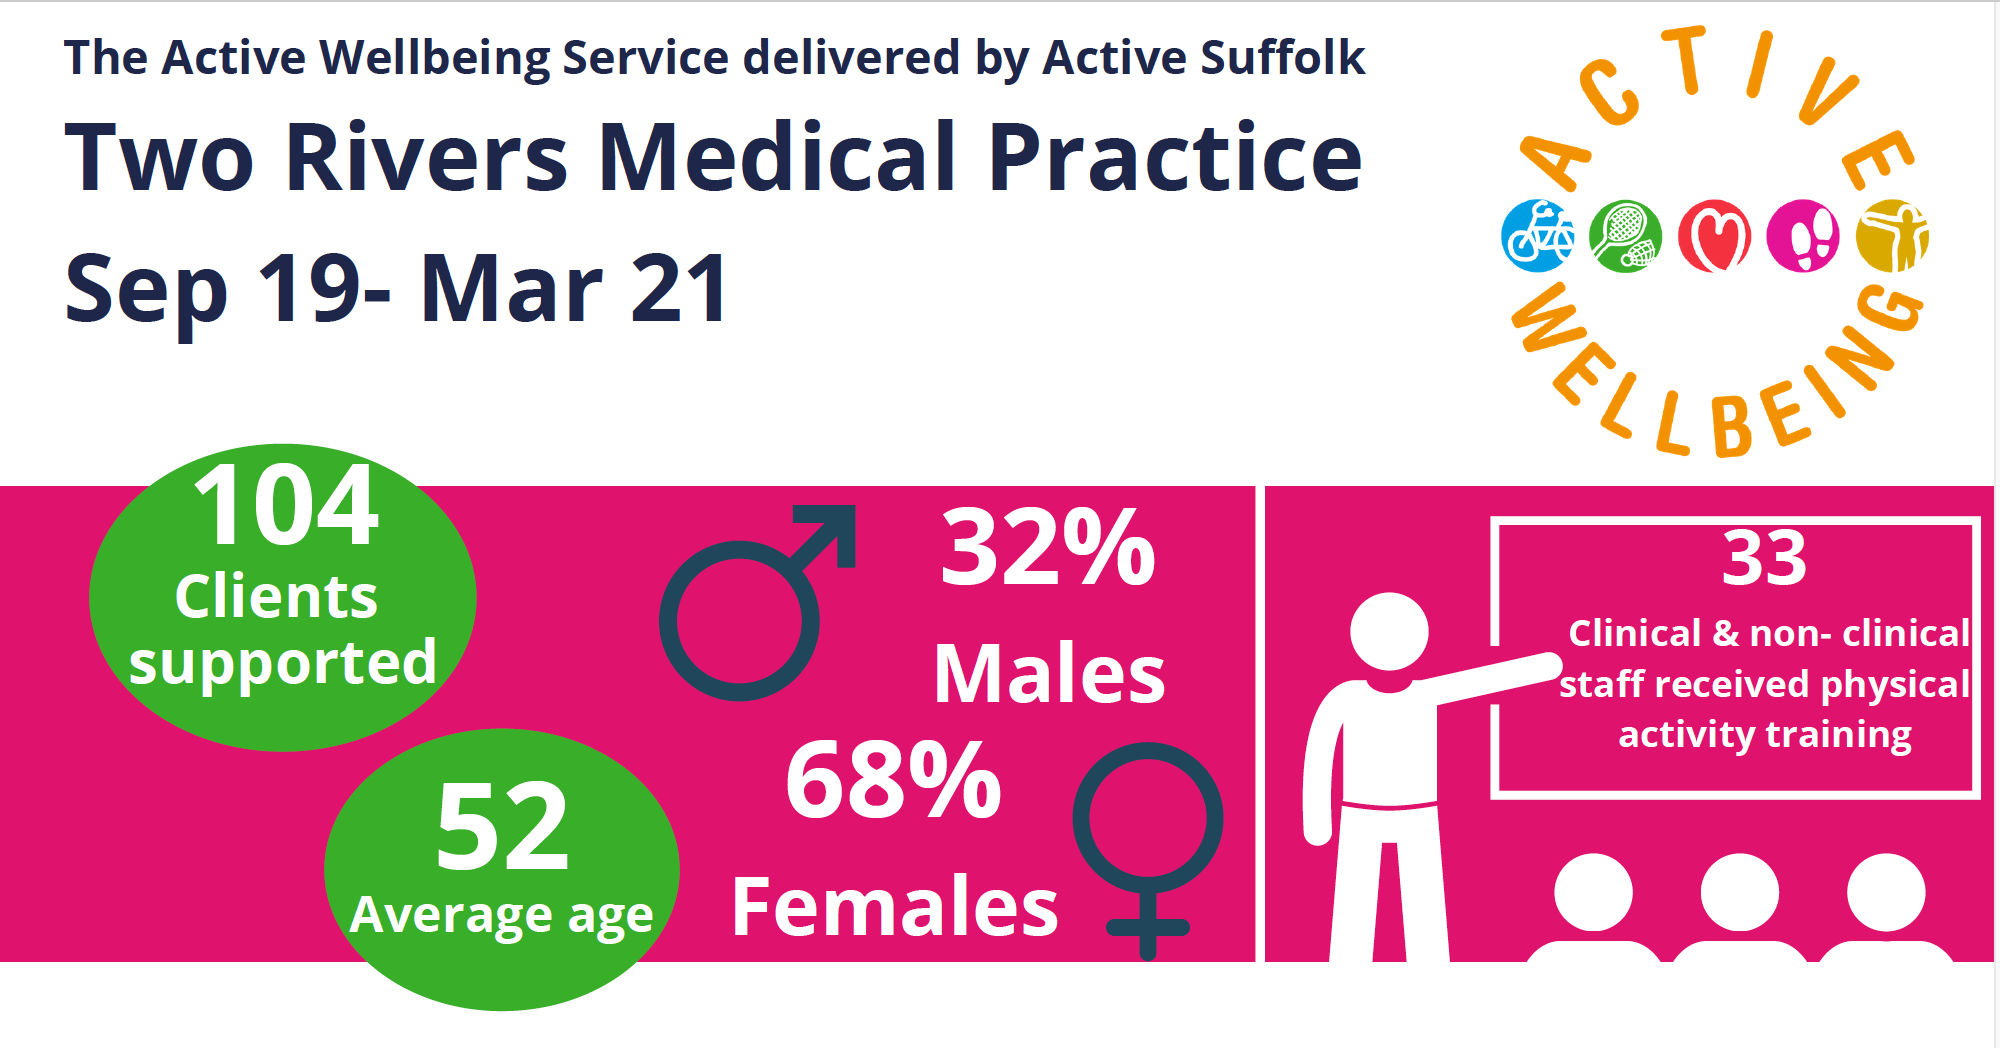 infographic stating Three Rivers Medal Practice involves 104 clients, 68% female, average age of 52